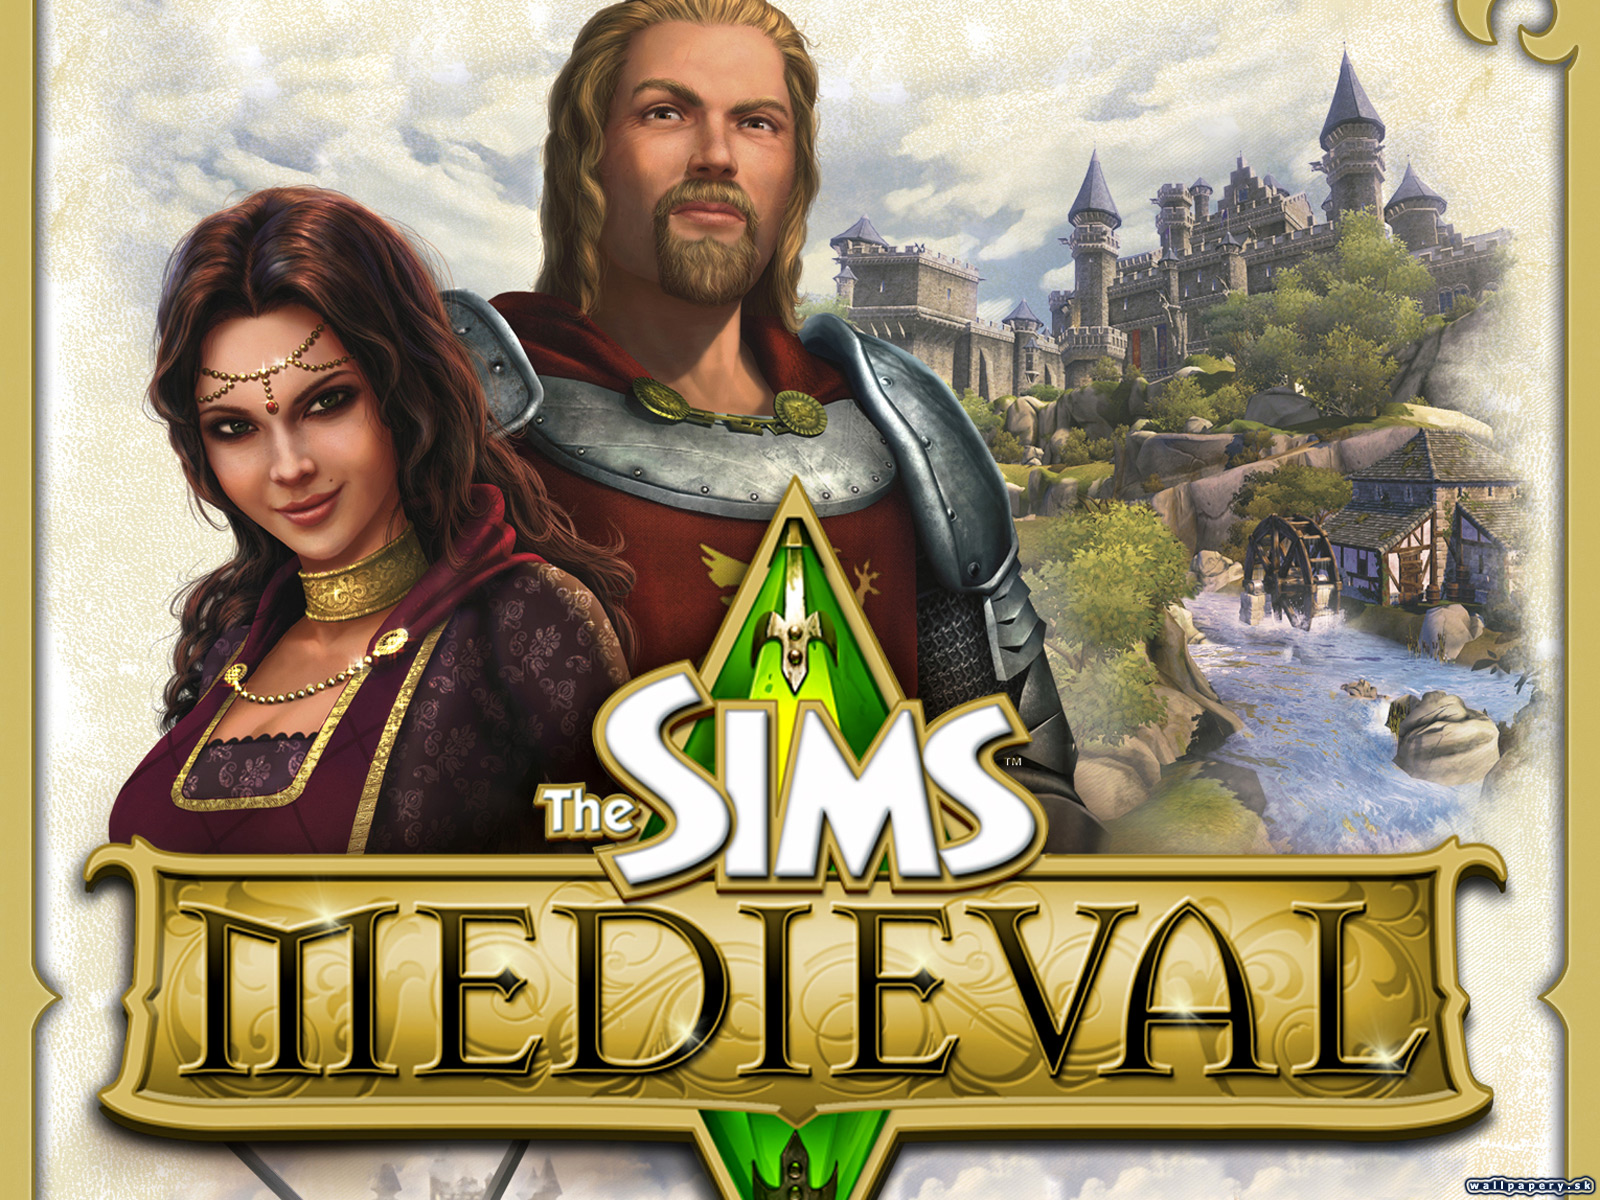 The Sims Medieval - wallpaper 1